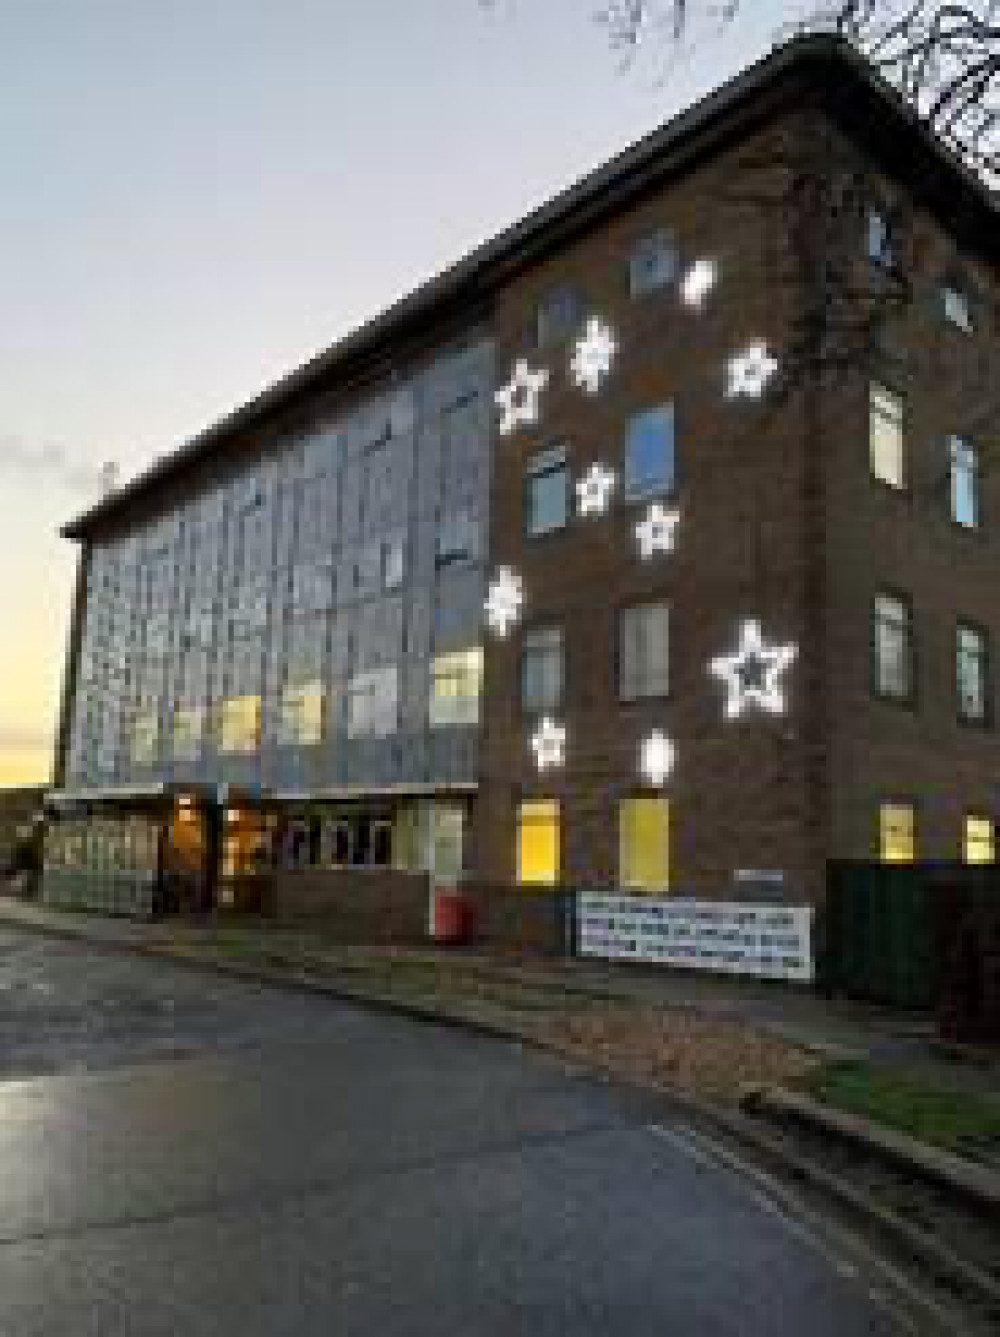 The United Lincolnshire Hospitals Charity’s Upon a Star Christmas campaign is taking place again this year. Image credit: ULH NHS Trust.